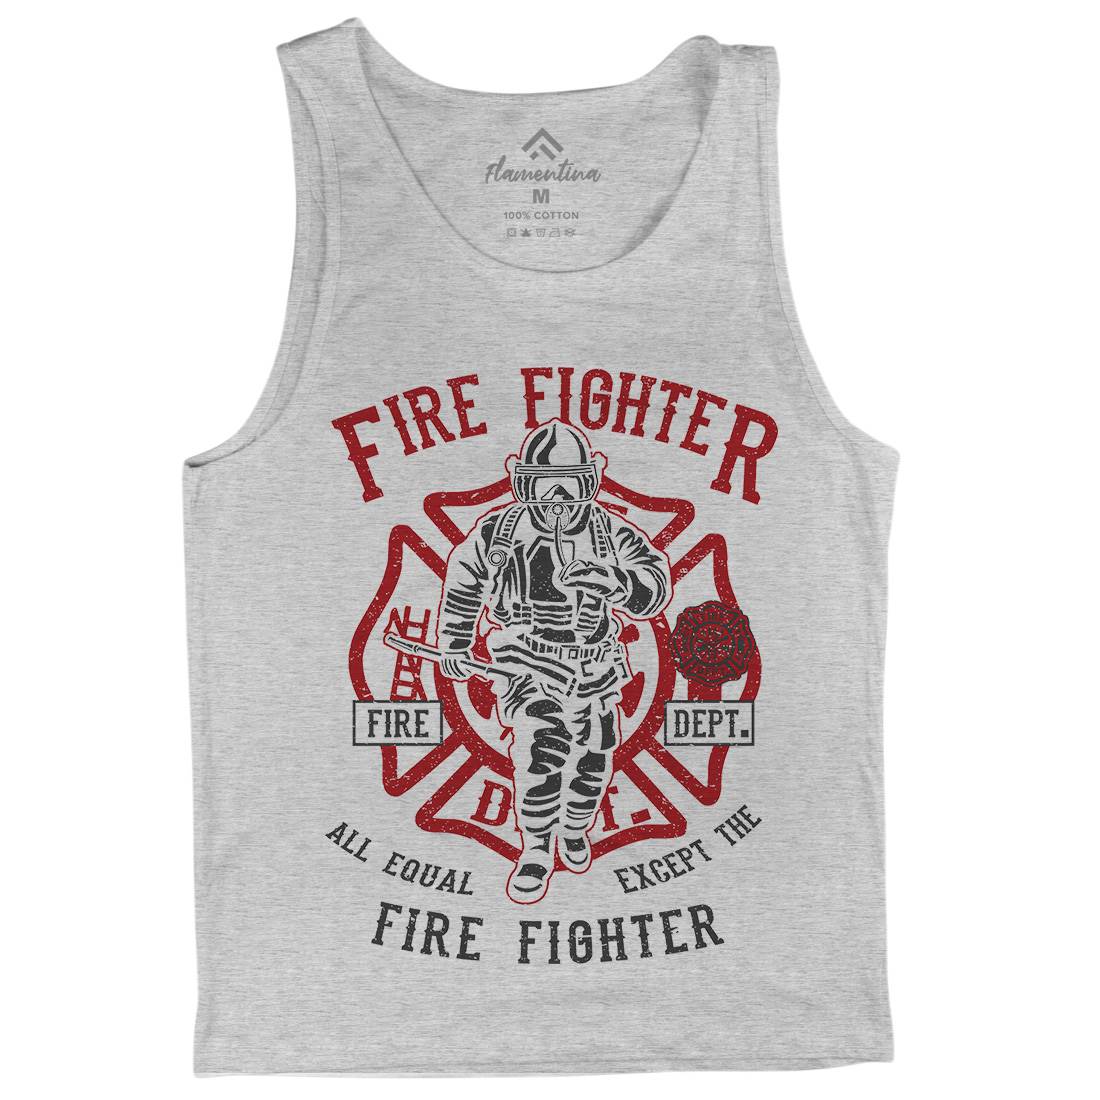 Fire Fighter Mens Tank Top Vest Firefighters A053